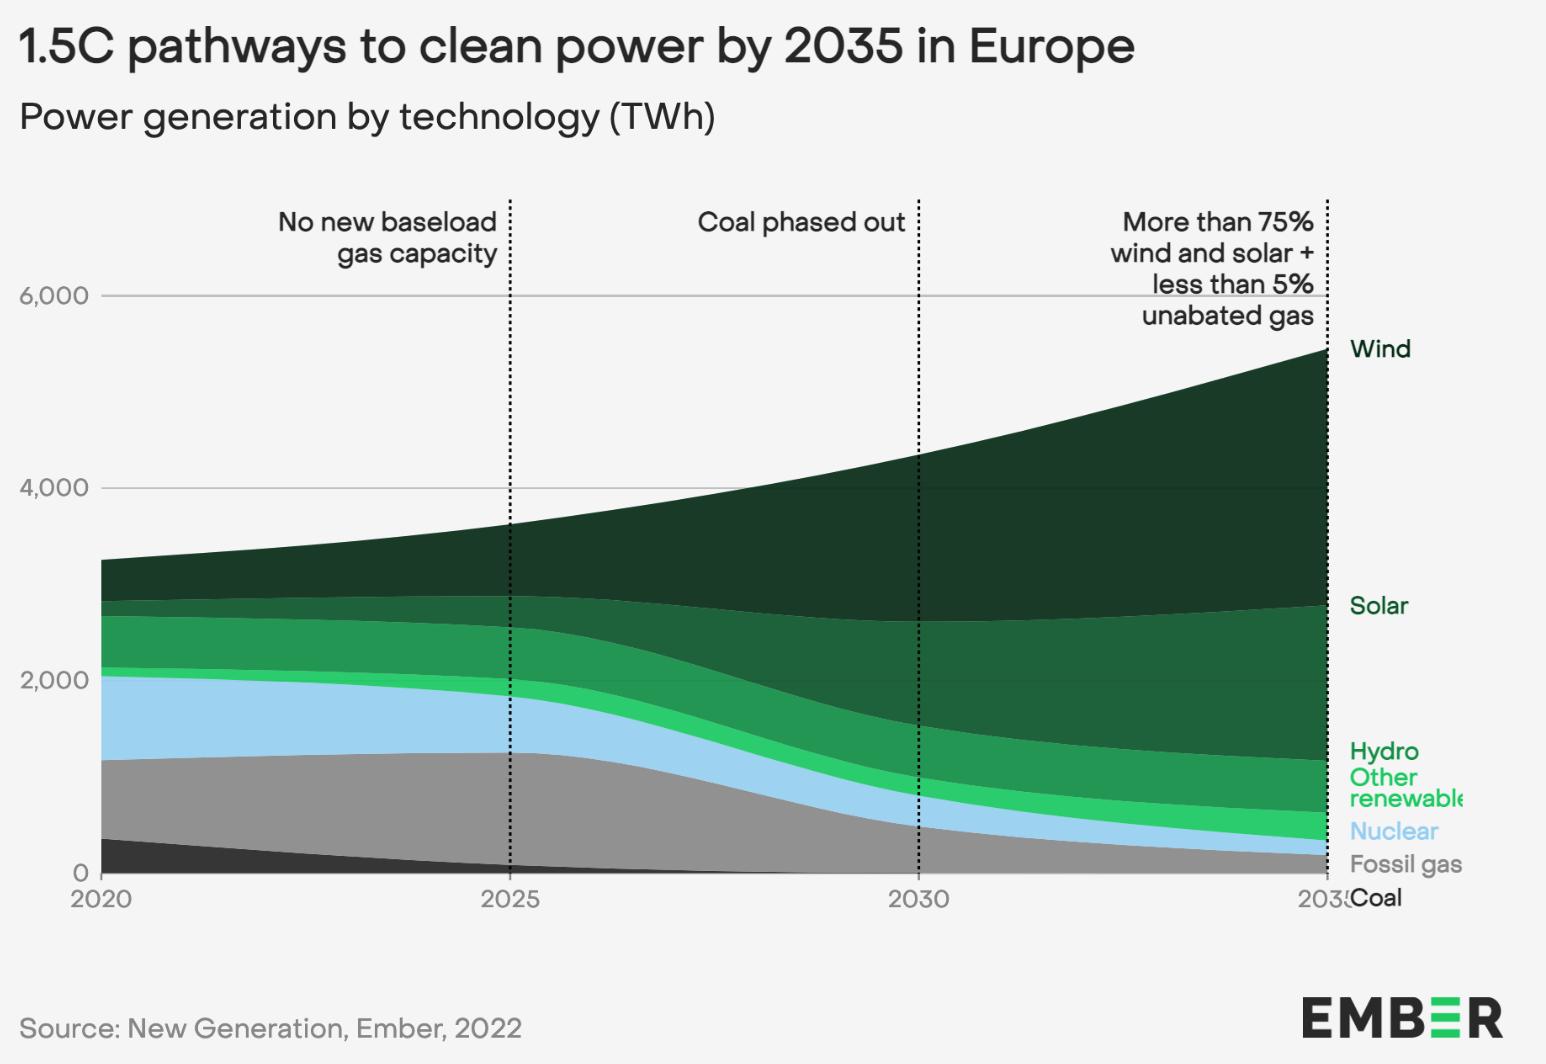 Solar Power And Wind Generated More Electricity In The Last Year Than Gas, Here’s How